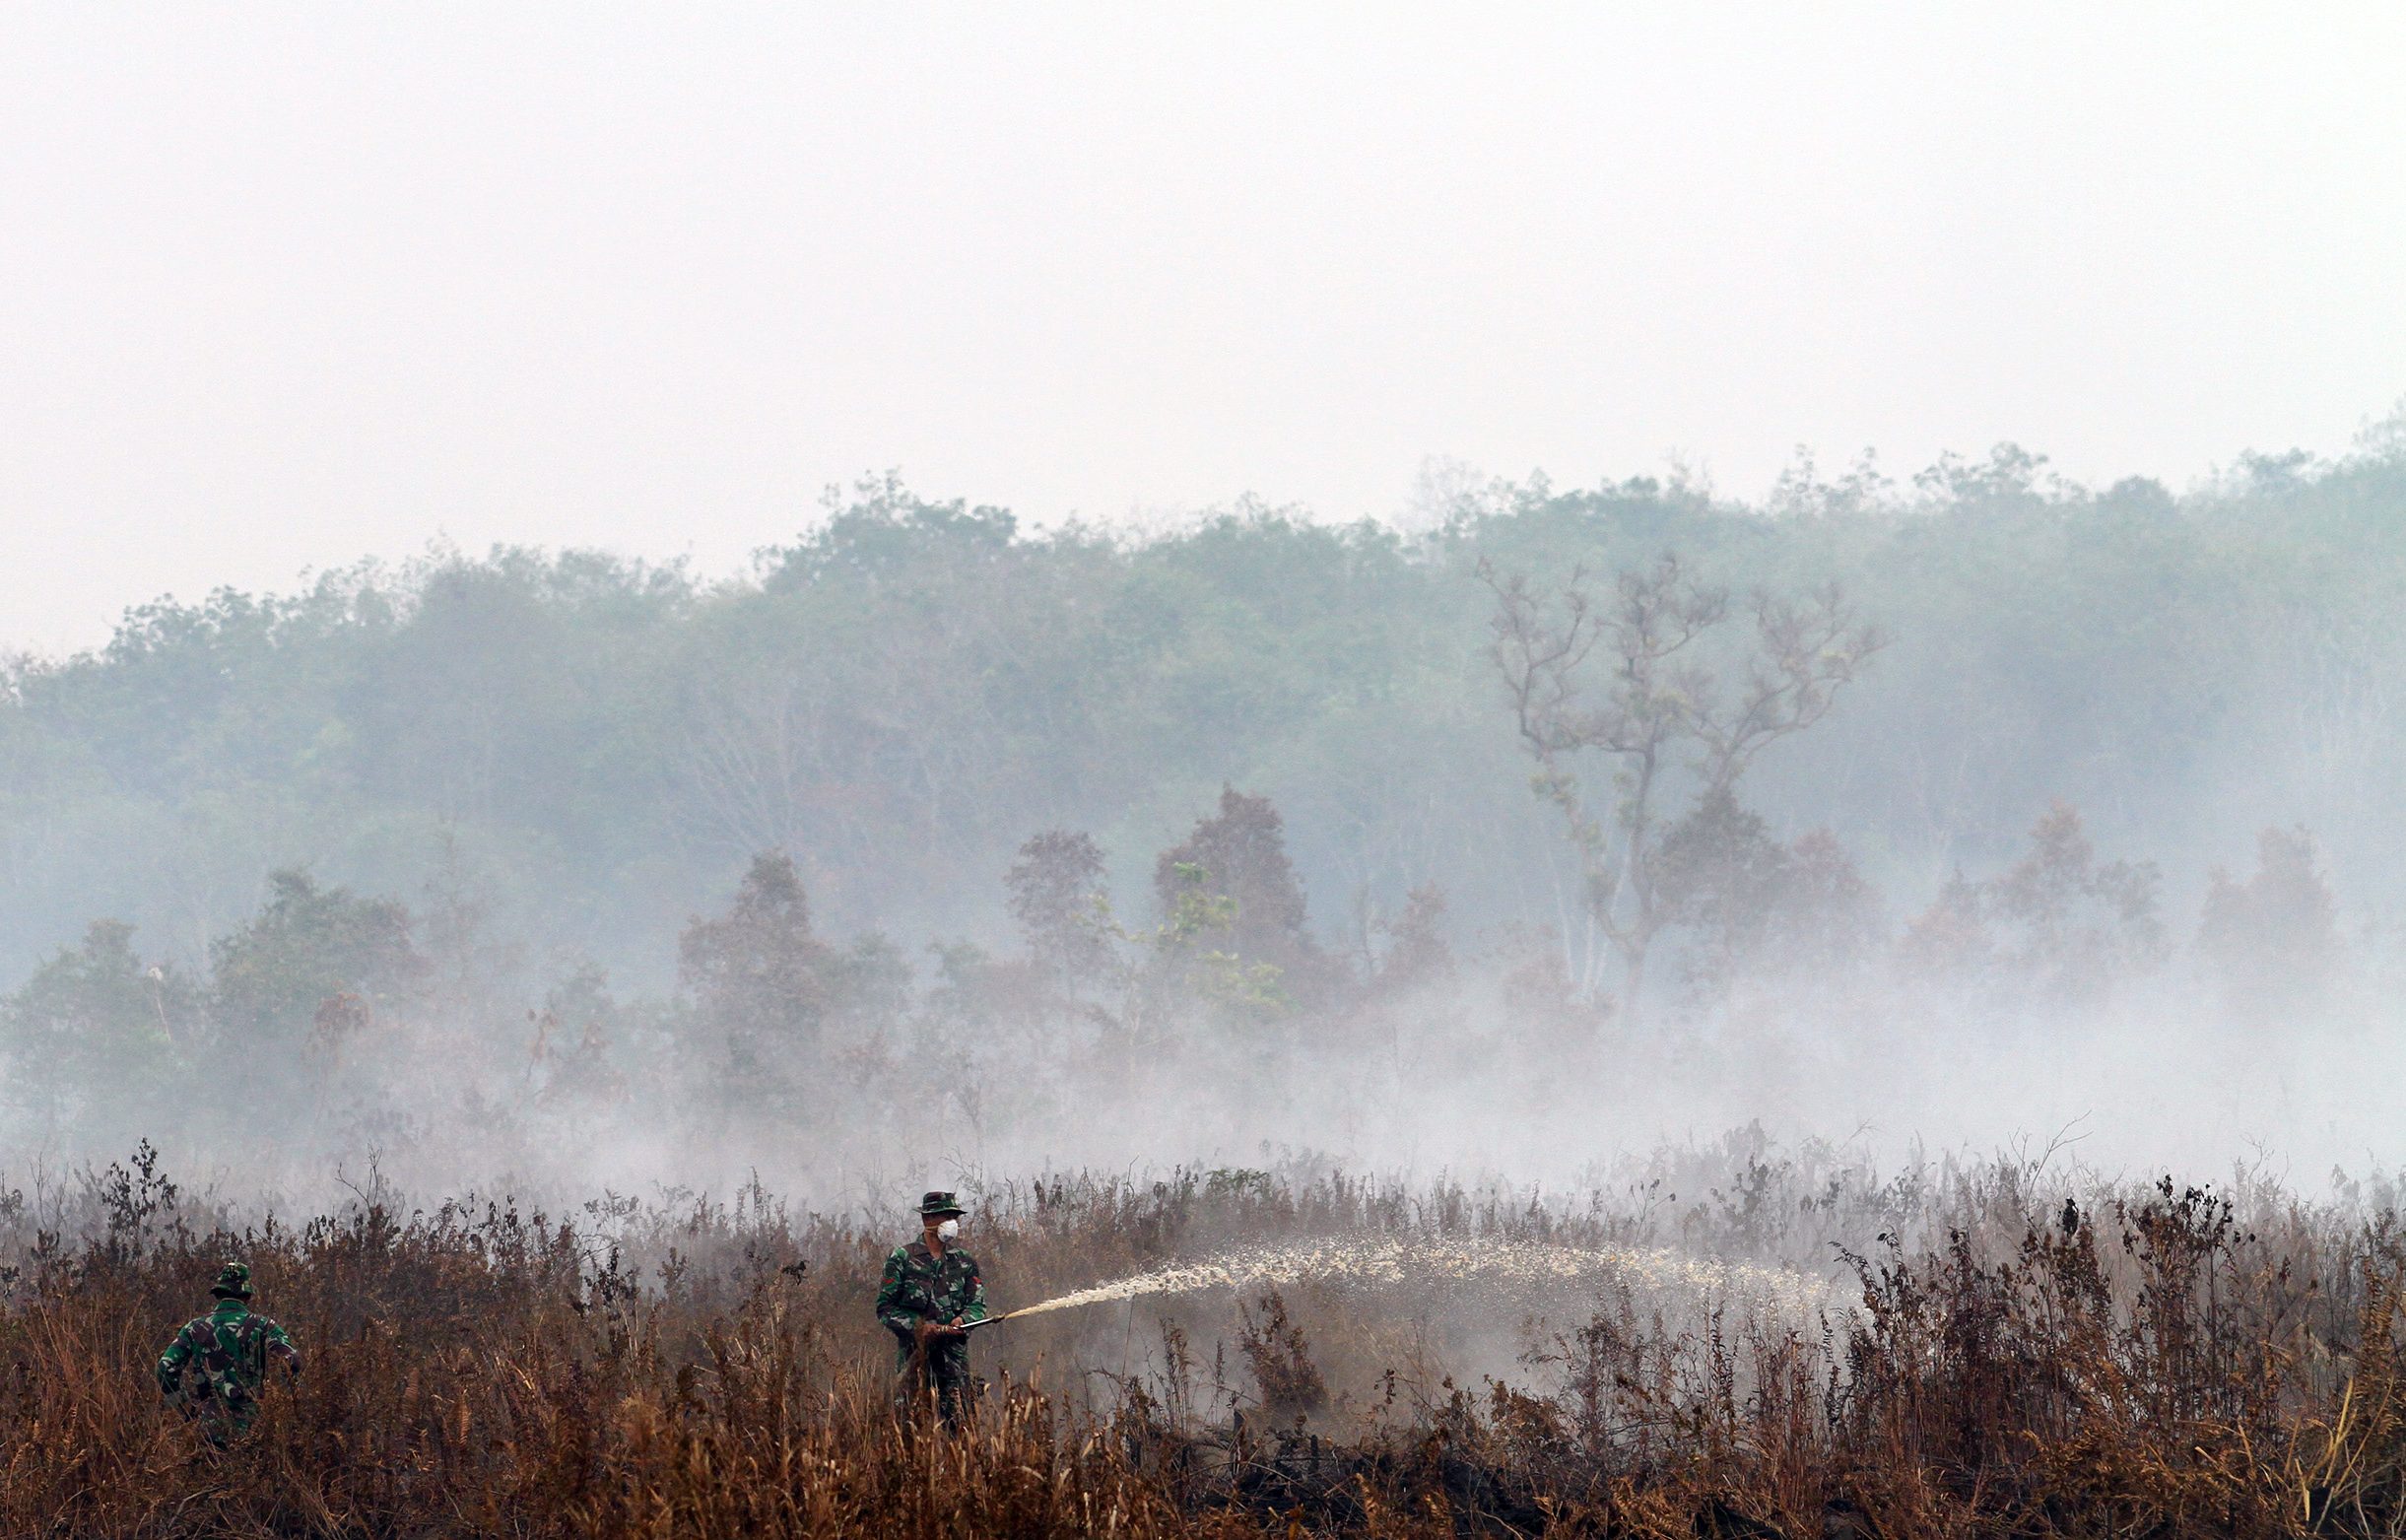 Singapore banks urged to curtail loans to haze-linked firms